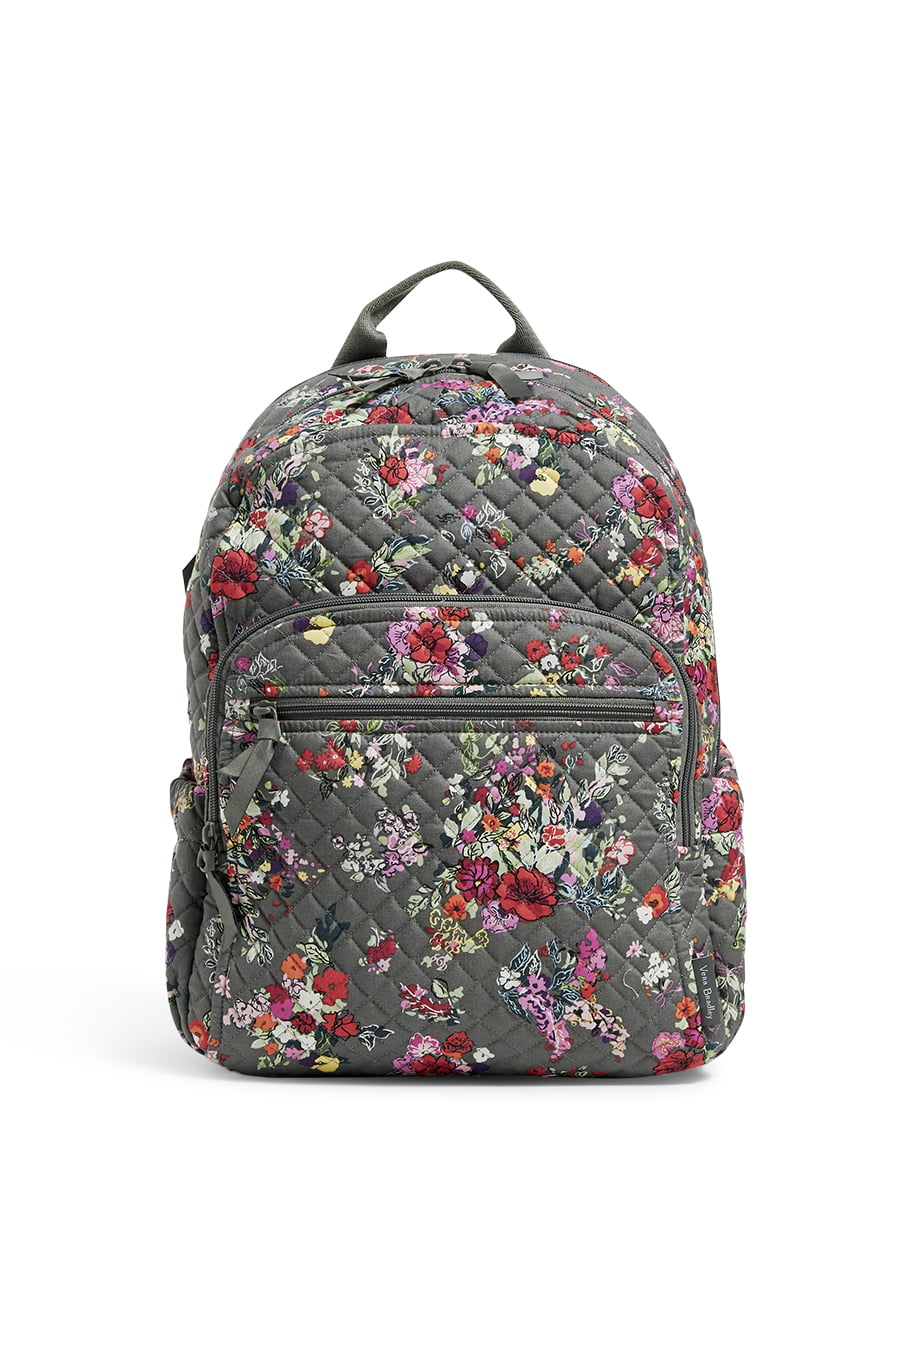 Vera Bradley Women's Recycled Cotton Campus Backpack Rosa Floral 